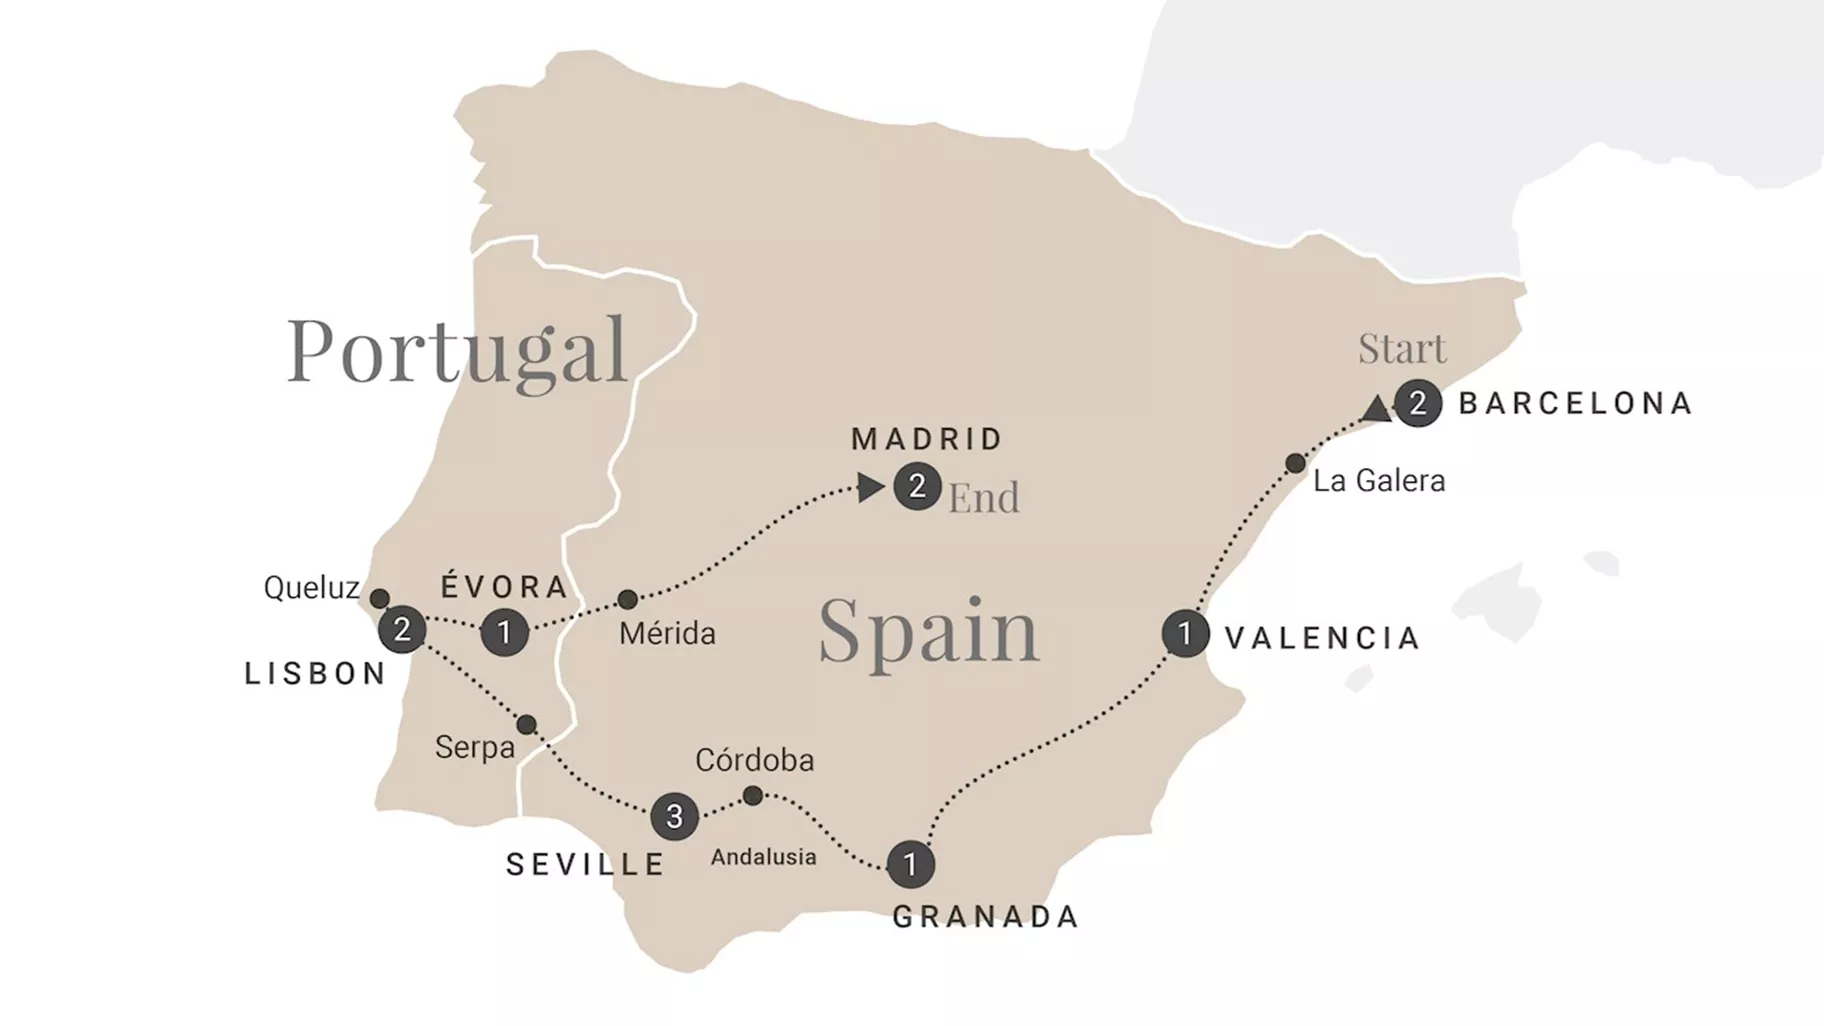 Map of Portugal and Spain